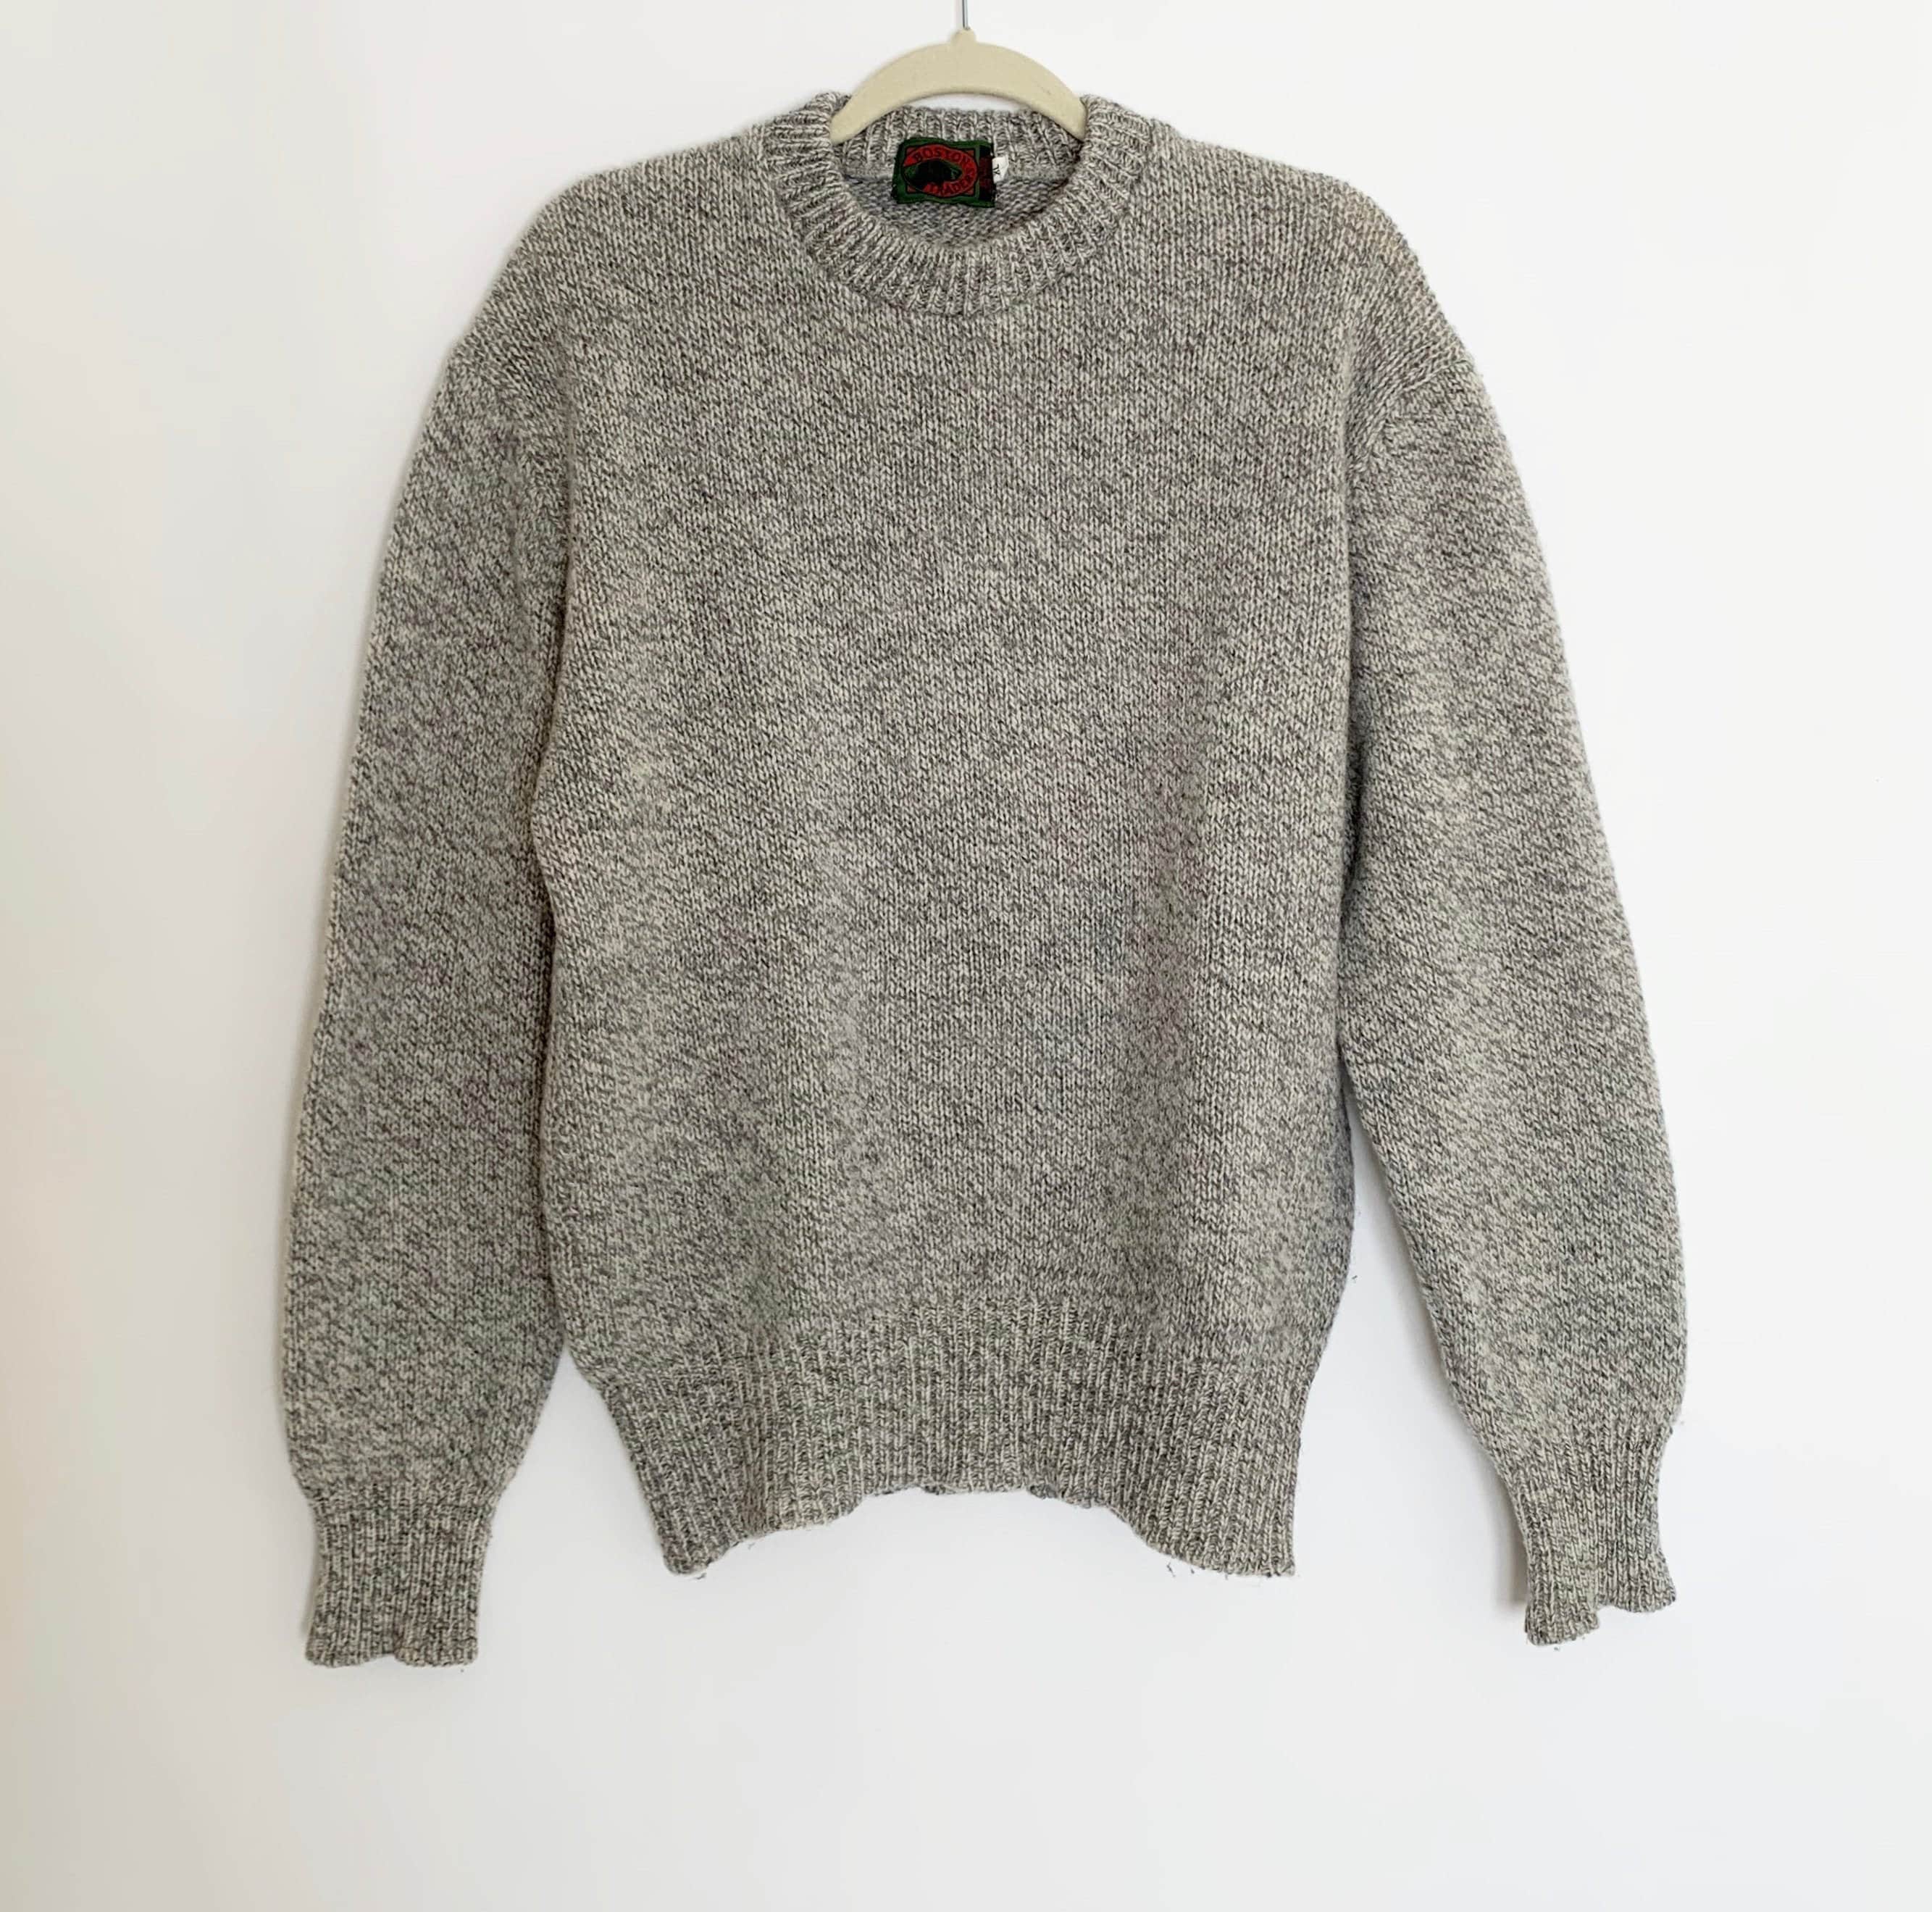 Oversized Marled Wool Sweater Gray Natural White Vintage Boston Traders ...